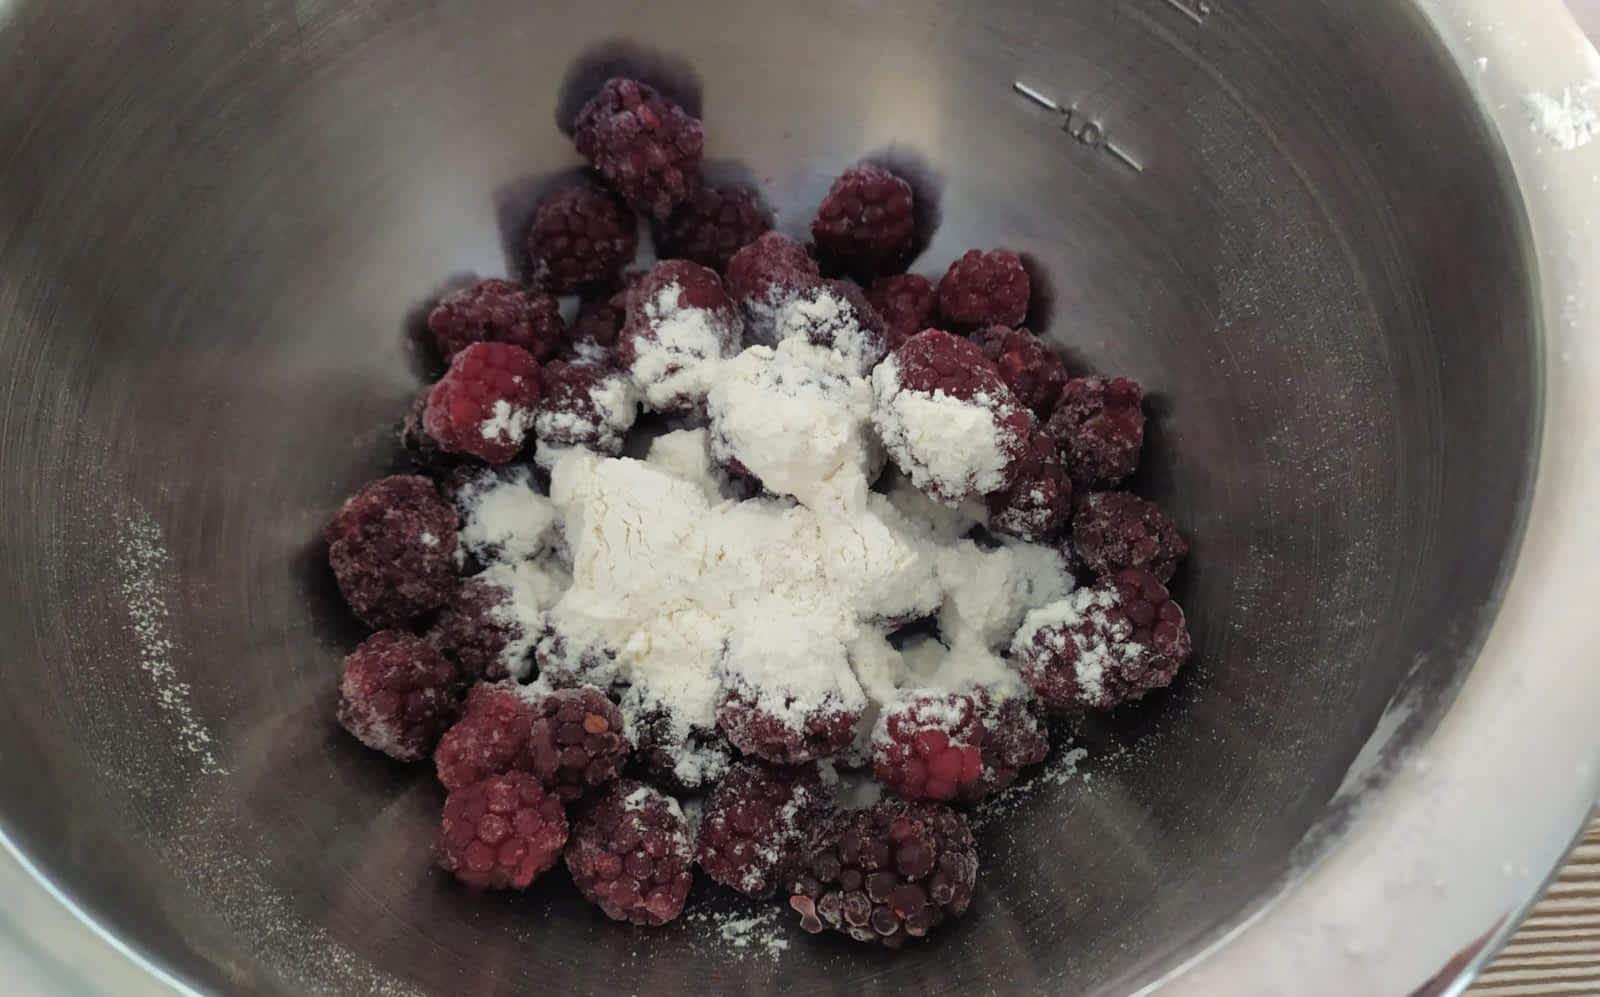 Coat the berries with flour so they don't sink in the batter.